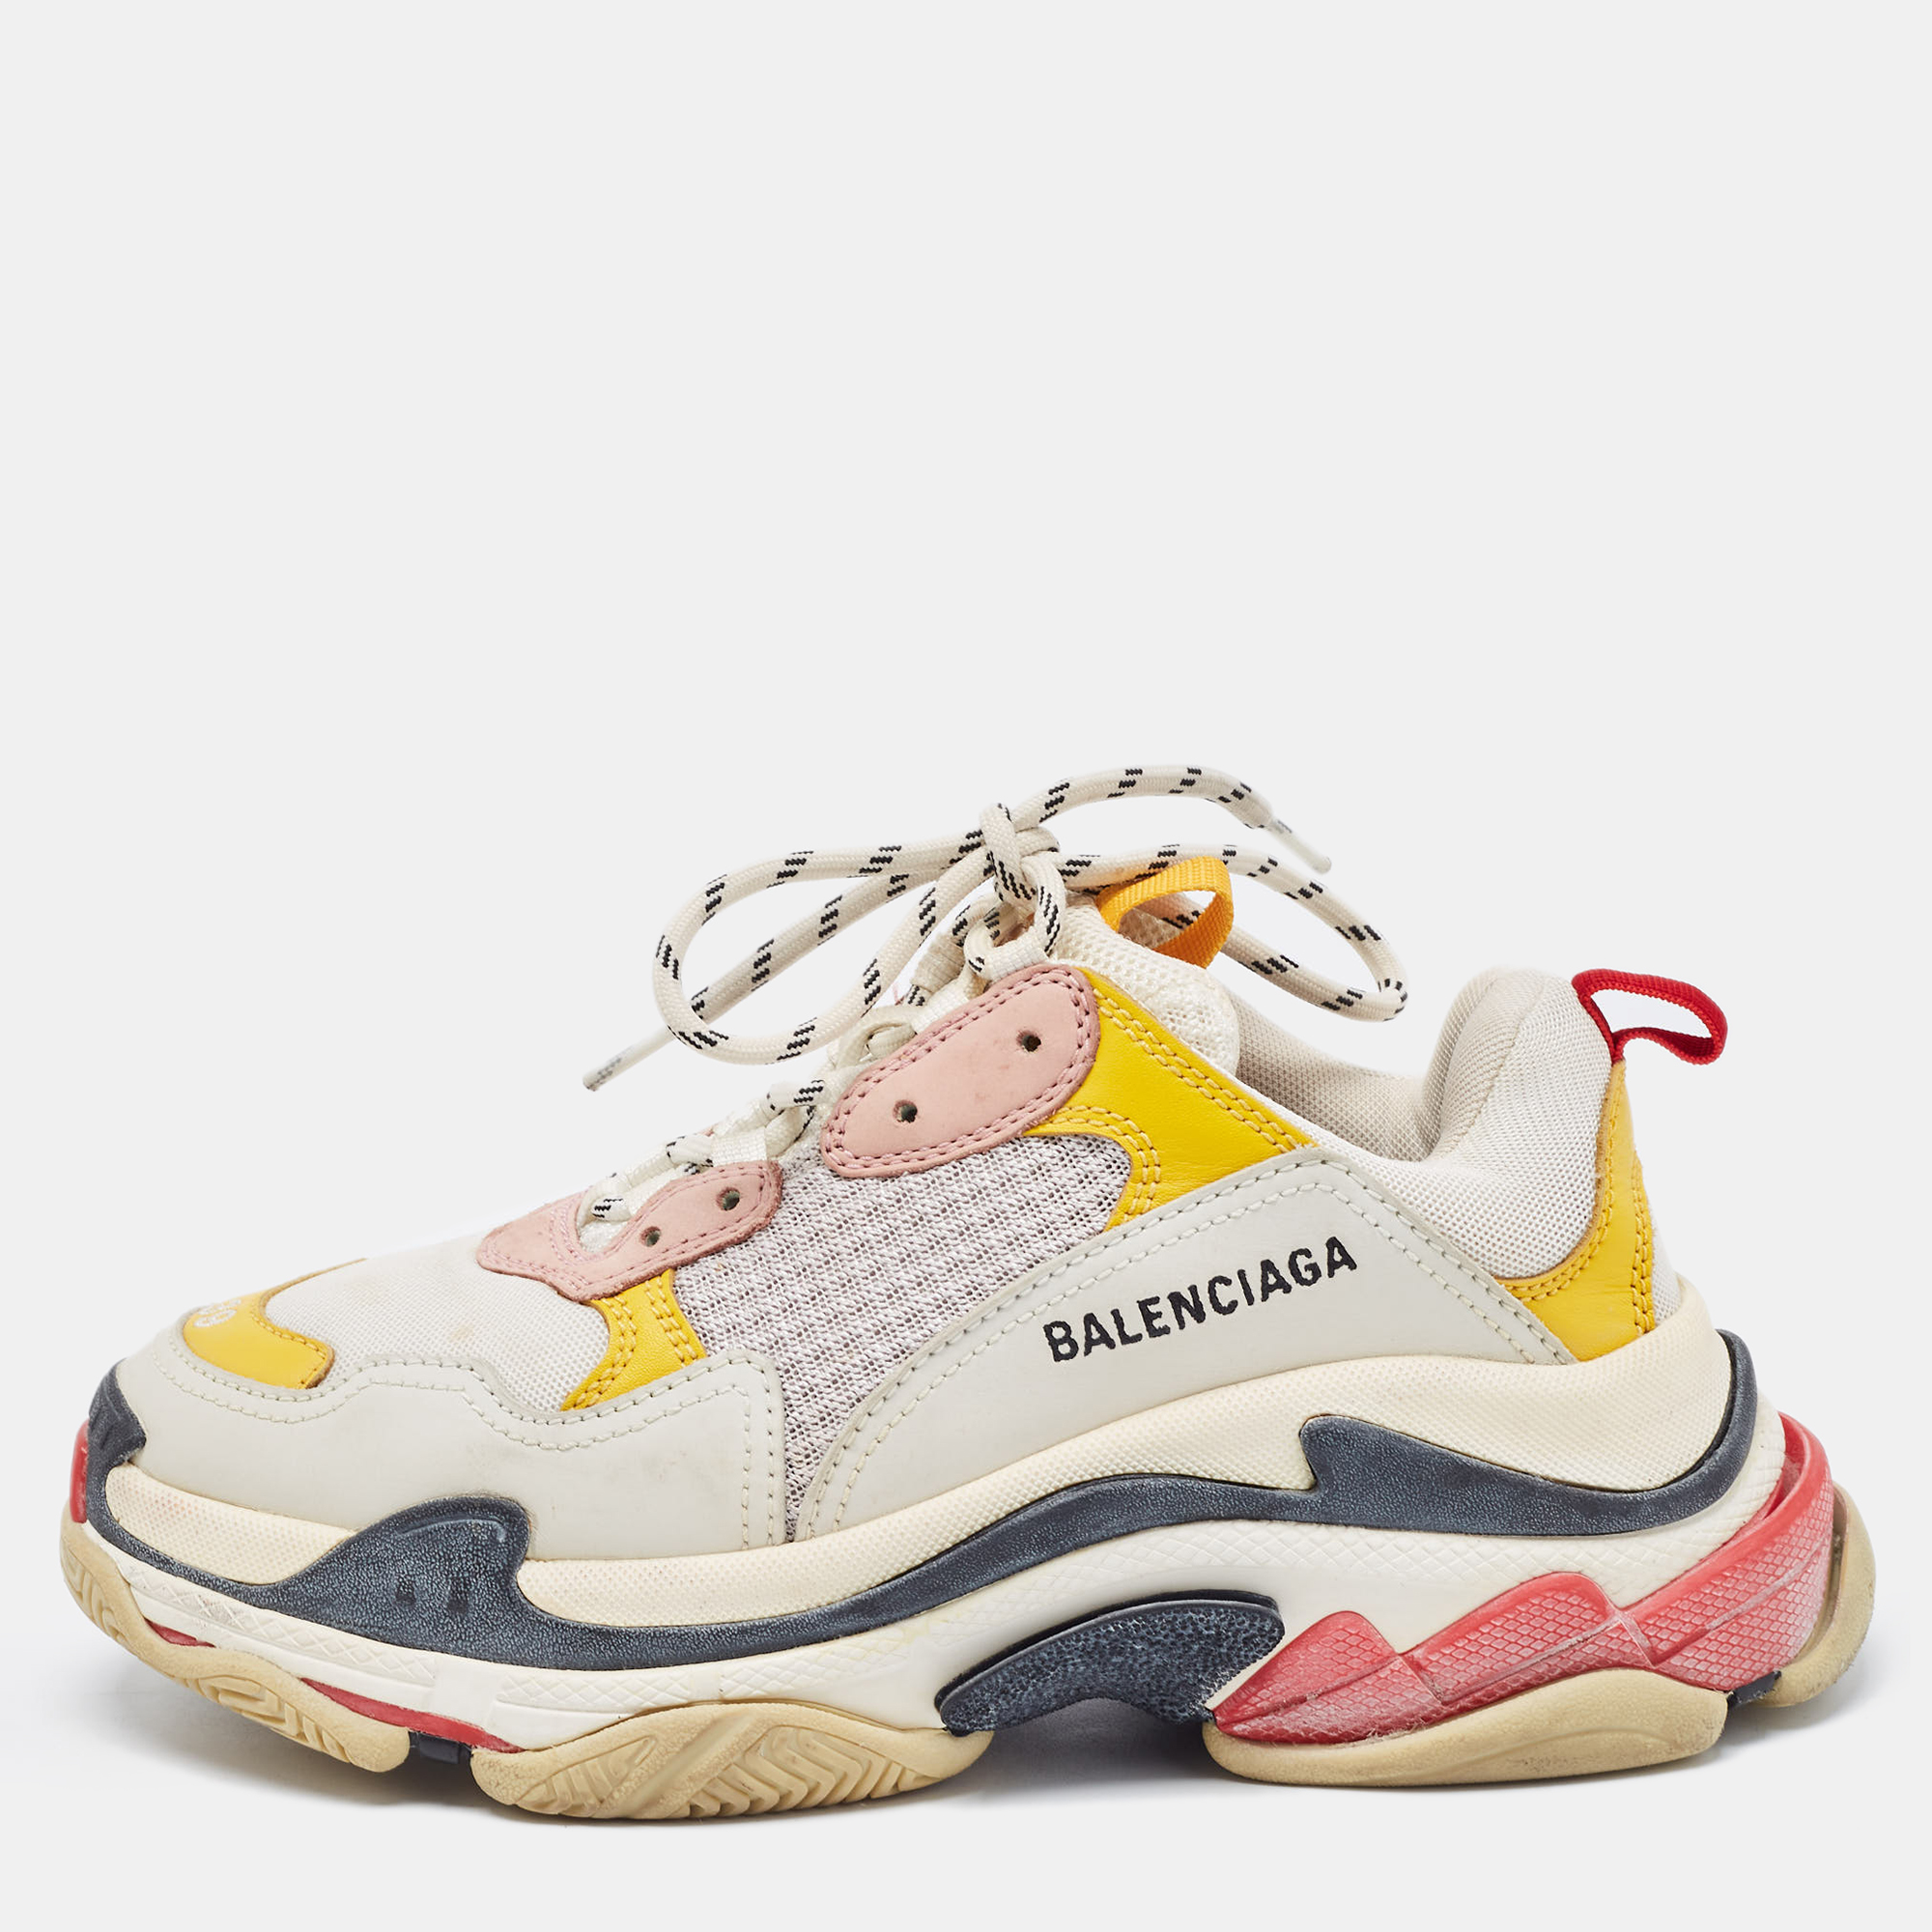 Balenciaga Multicolor Mesh And Leather Triple S Sneakers Size 39